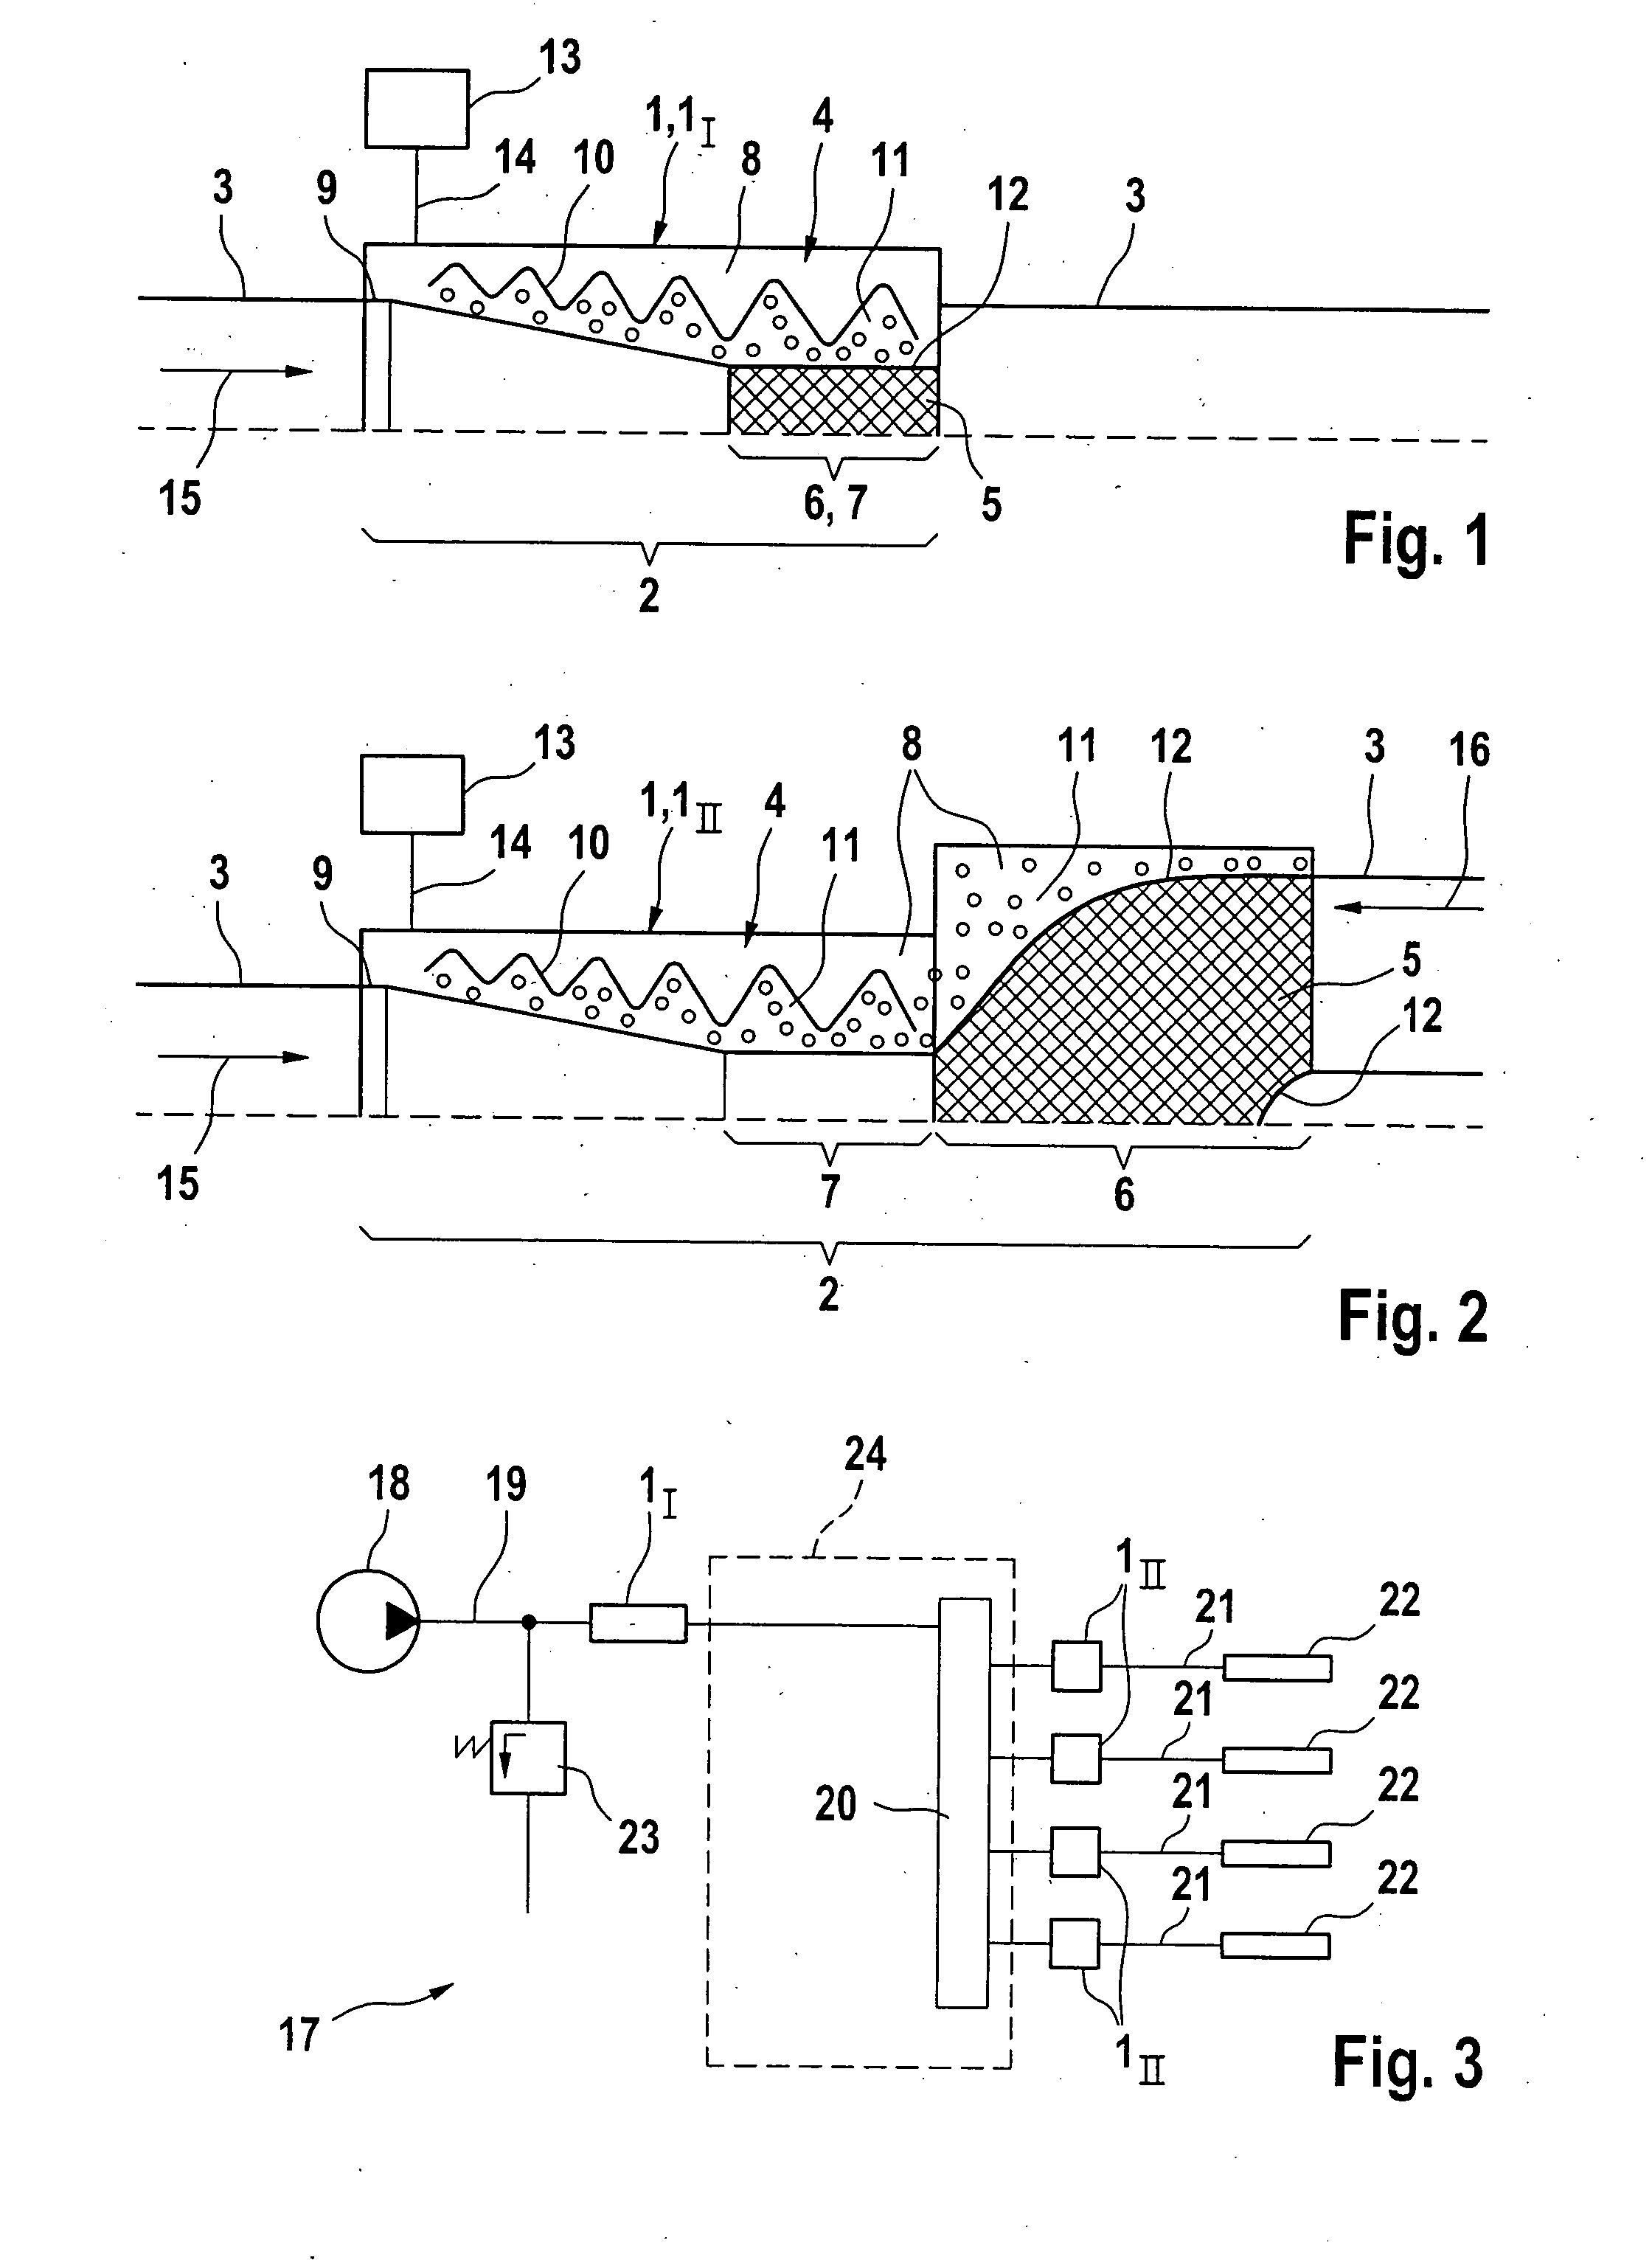 Device and Method for Controlling the Flow Speed of a Fluid Flow in a Hydraulic Line